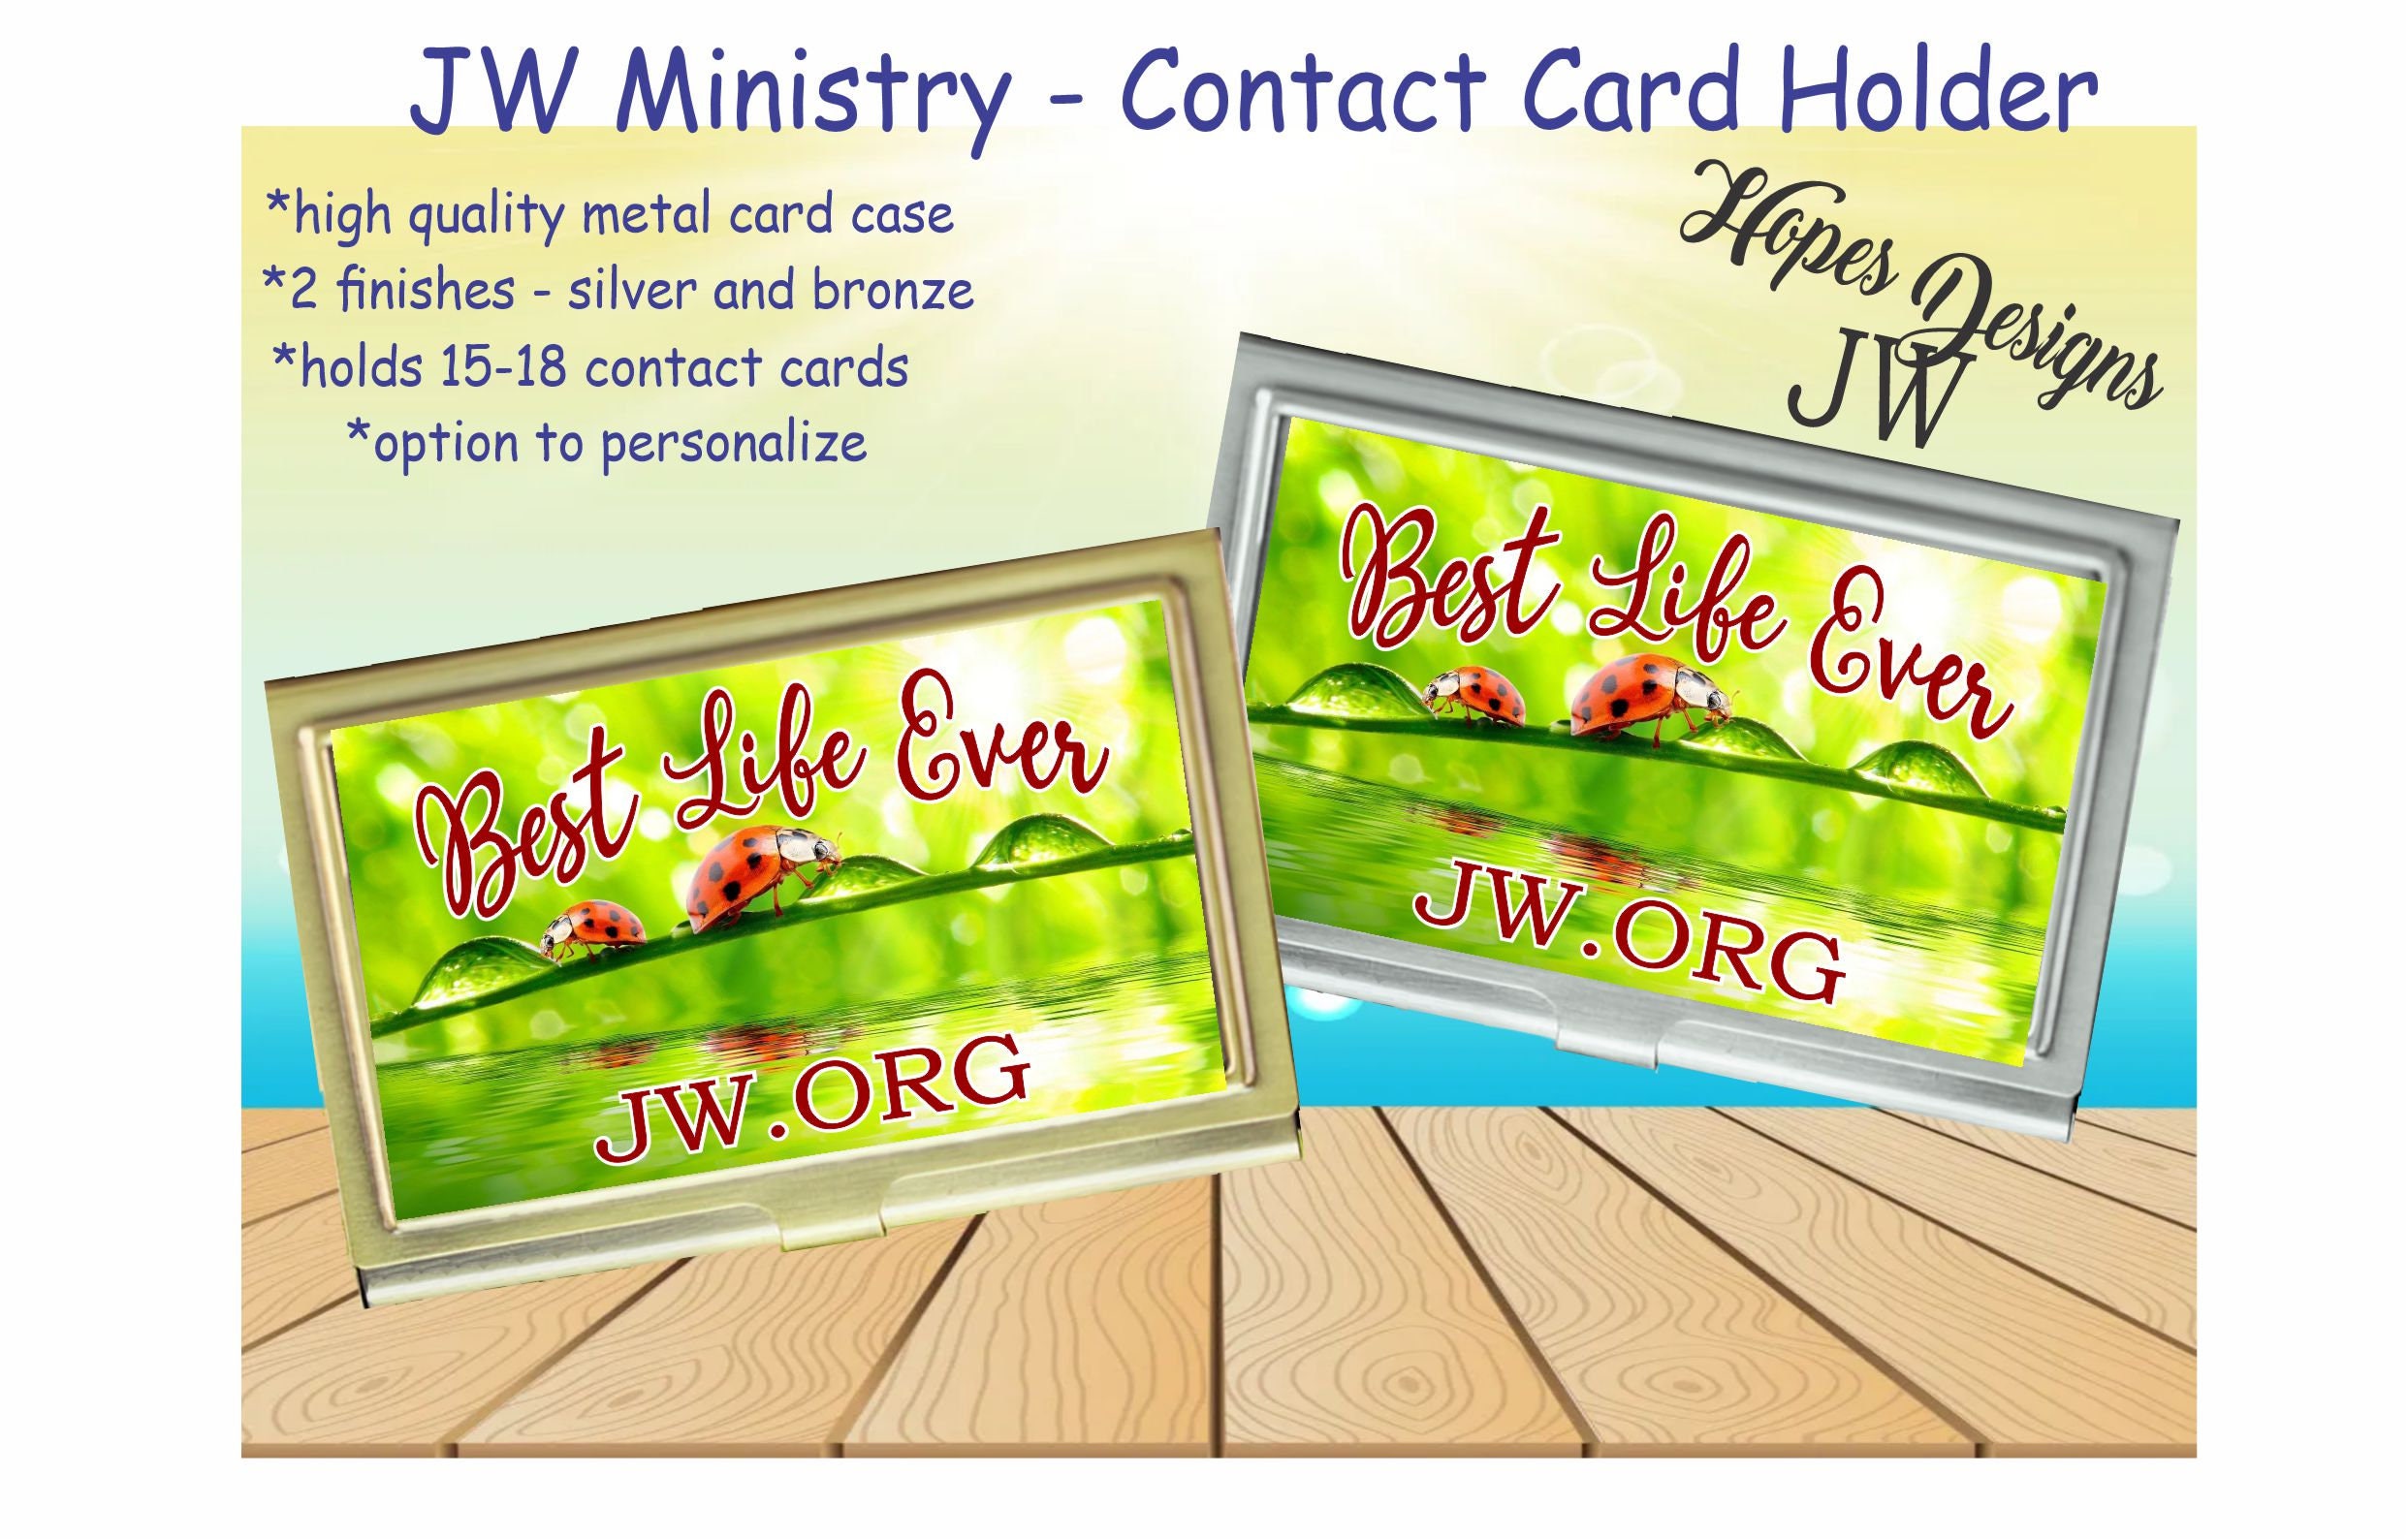 JW Gifts Magazine & Tract Folder+Contact-card For The Ministry